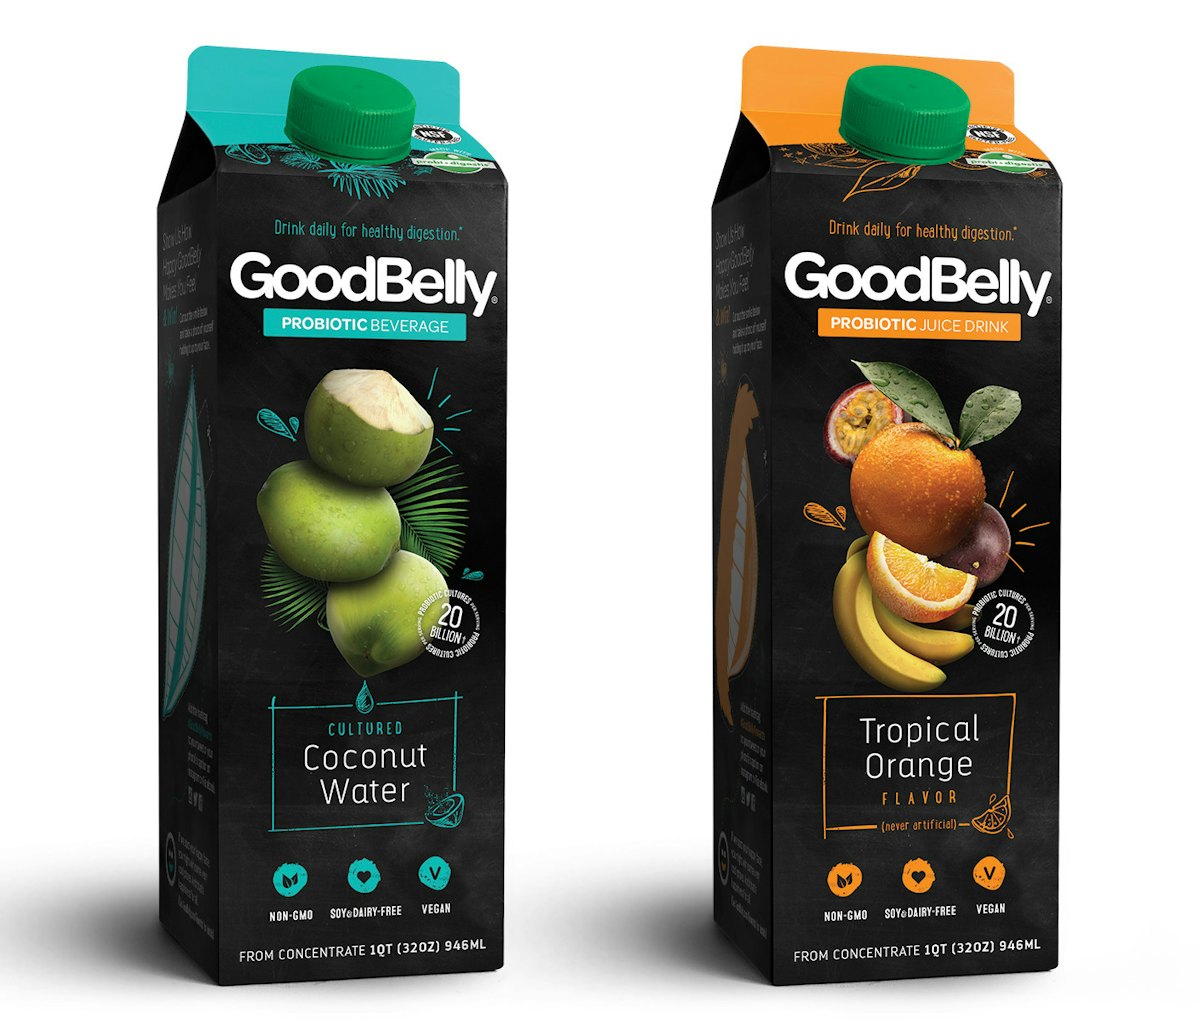 Where the heck is GoodBelly sold?